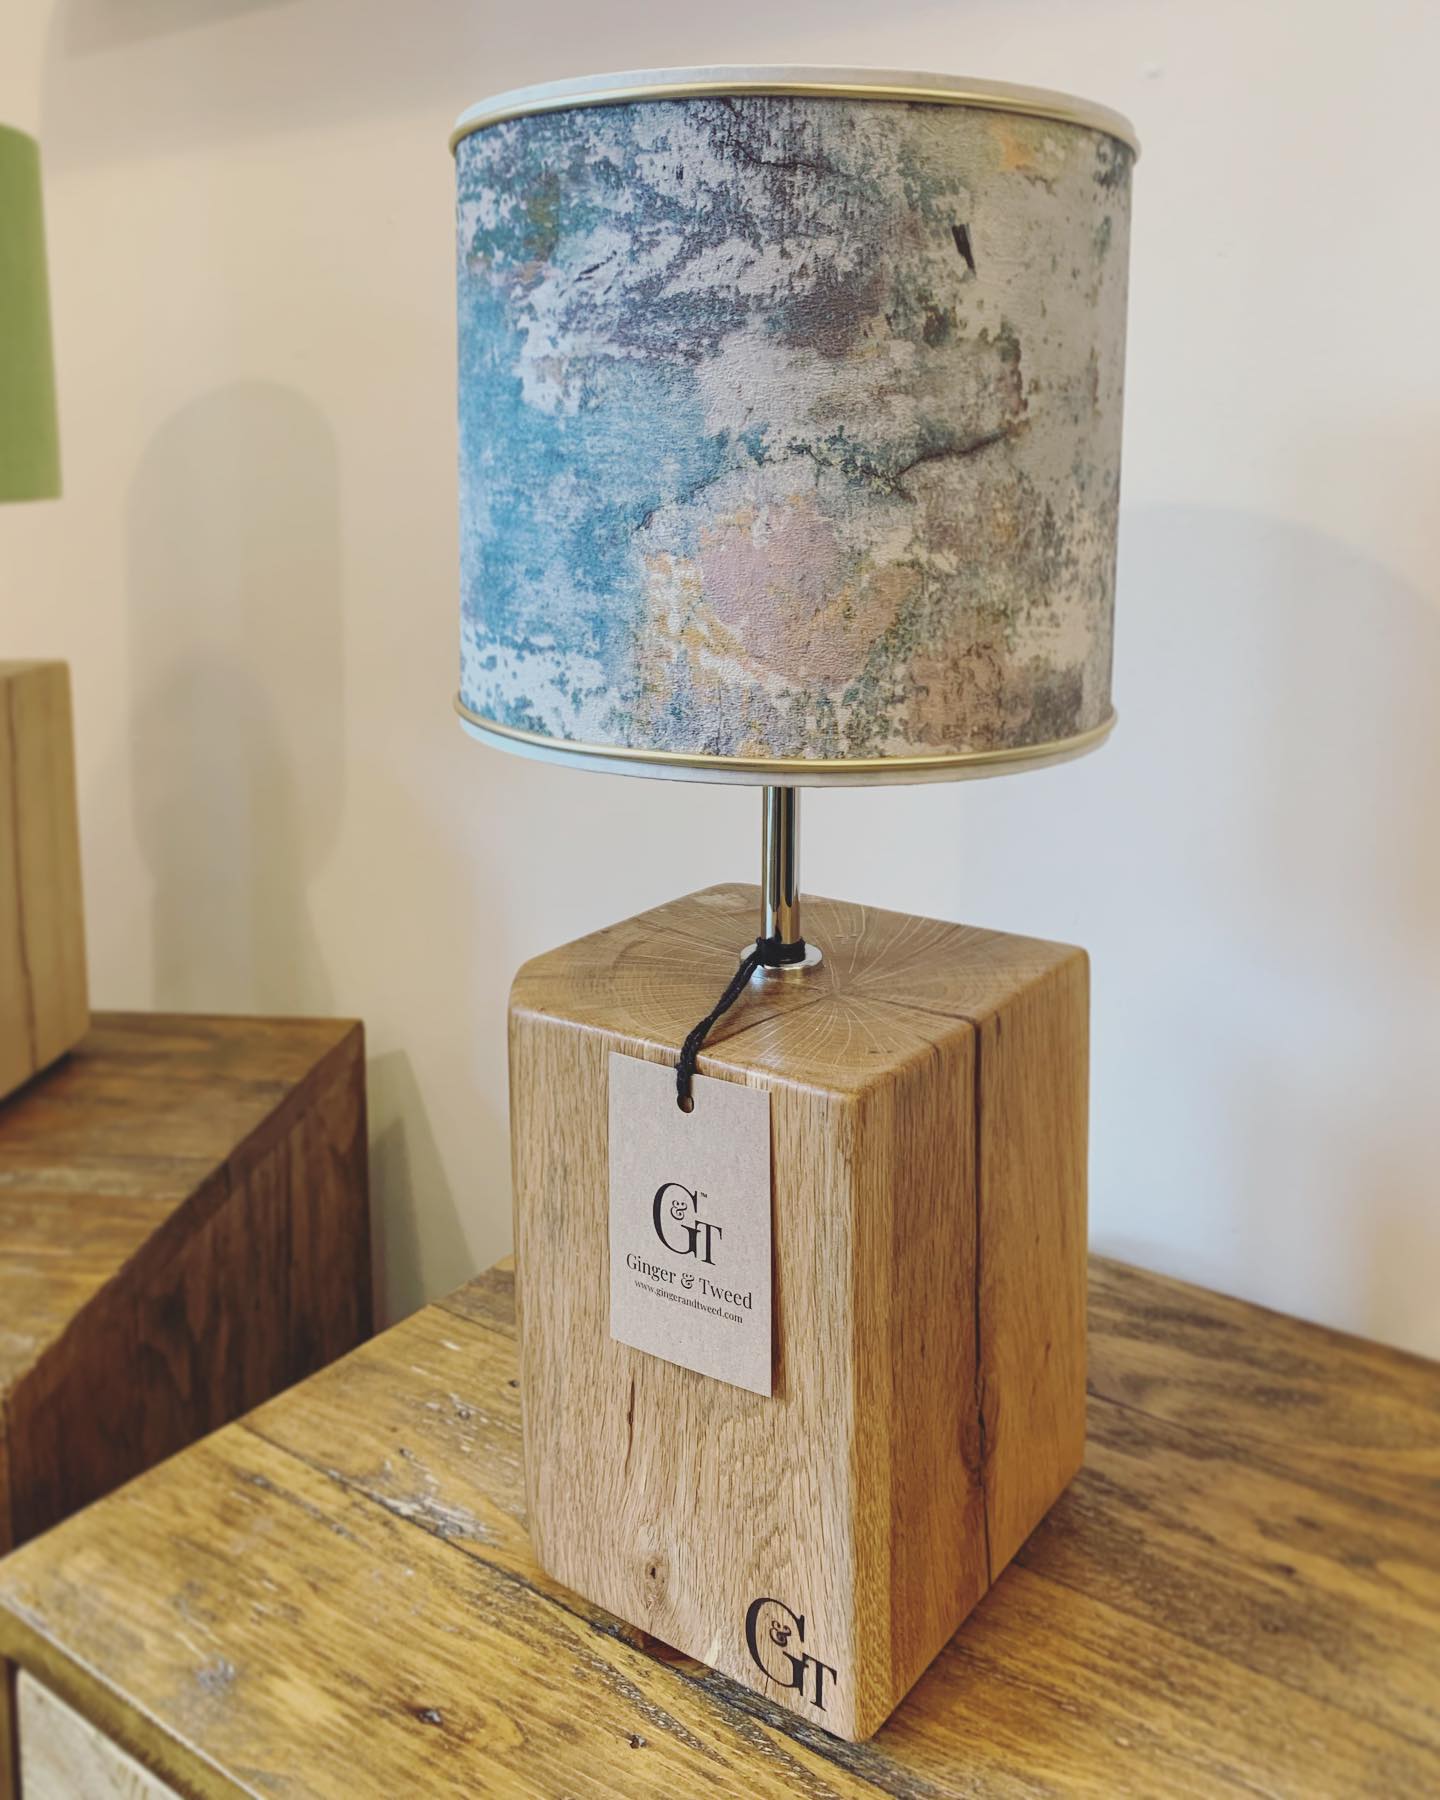 Today we made the trip to Wincanton to the beautiful @theluxurylampshadecompany with a fresh batch of oak lamp bases. Look at this stunning shade handmade by Laura complimented by the rustic oak 🧡 If you’re interested in lamps or shades, let Laura or myself know ️ I’m in love with the green one! ️️